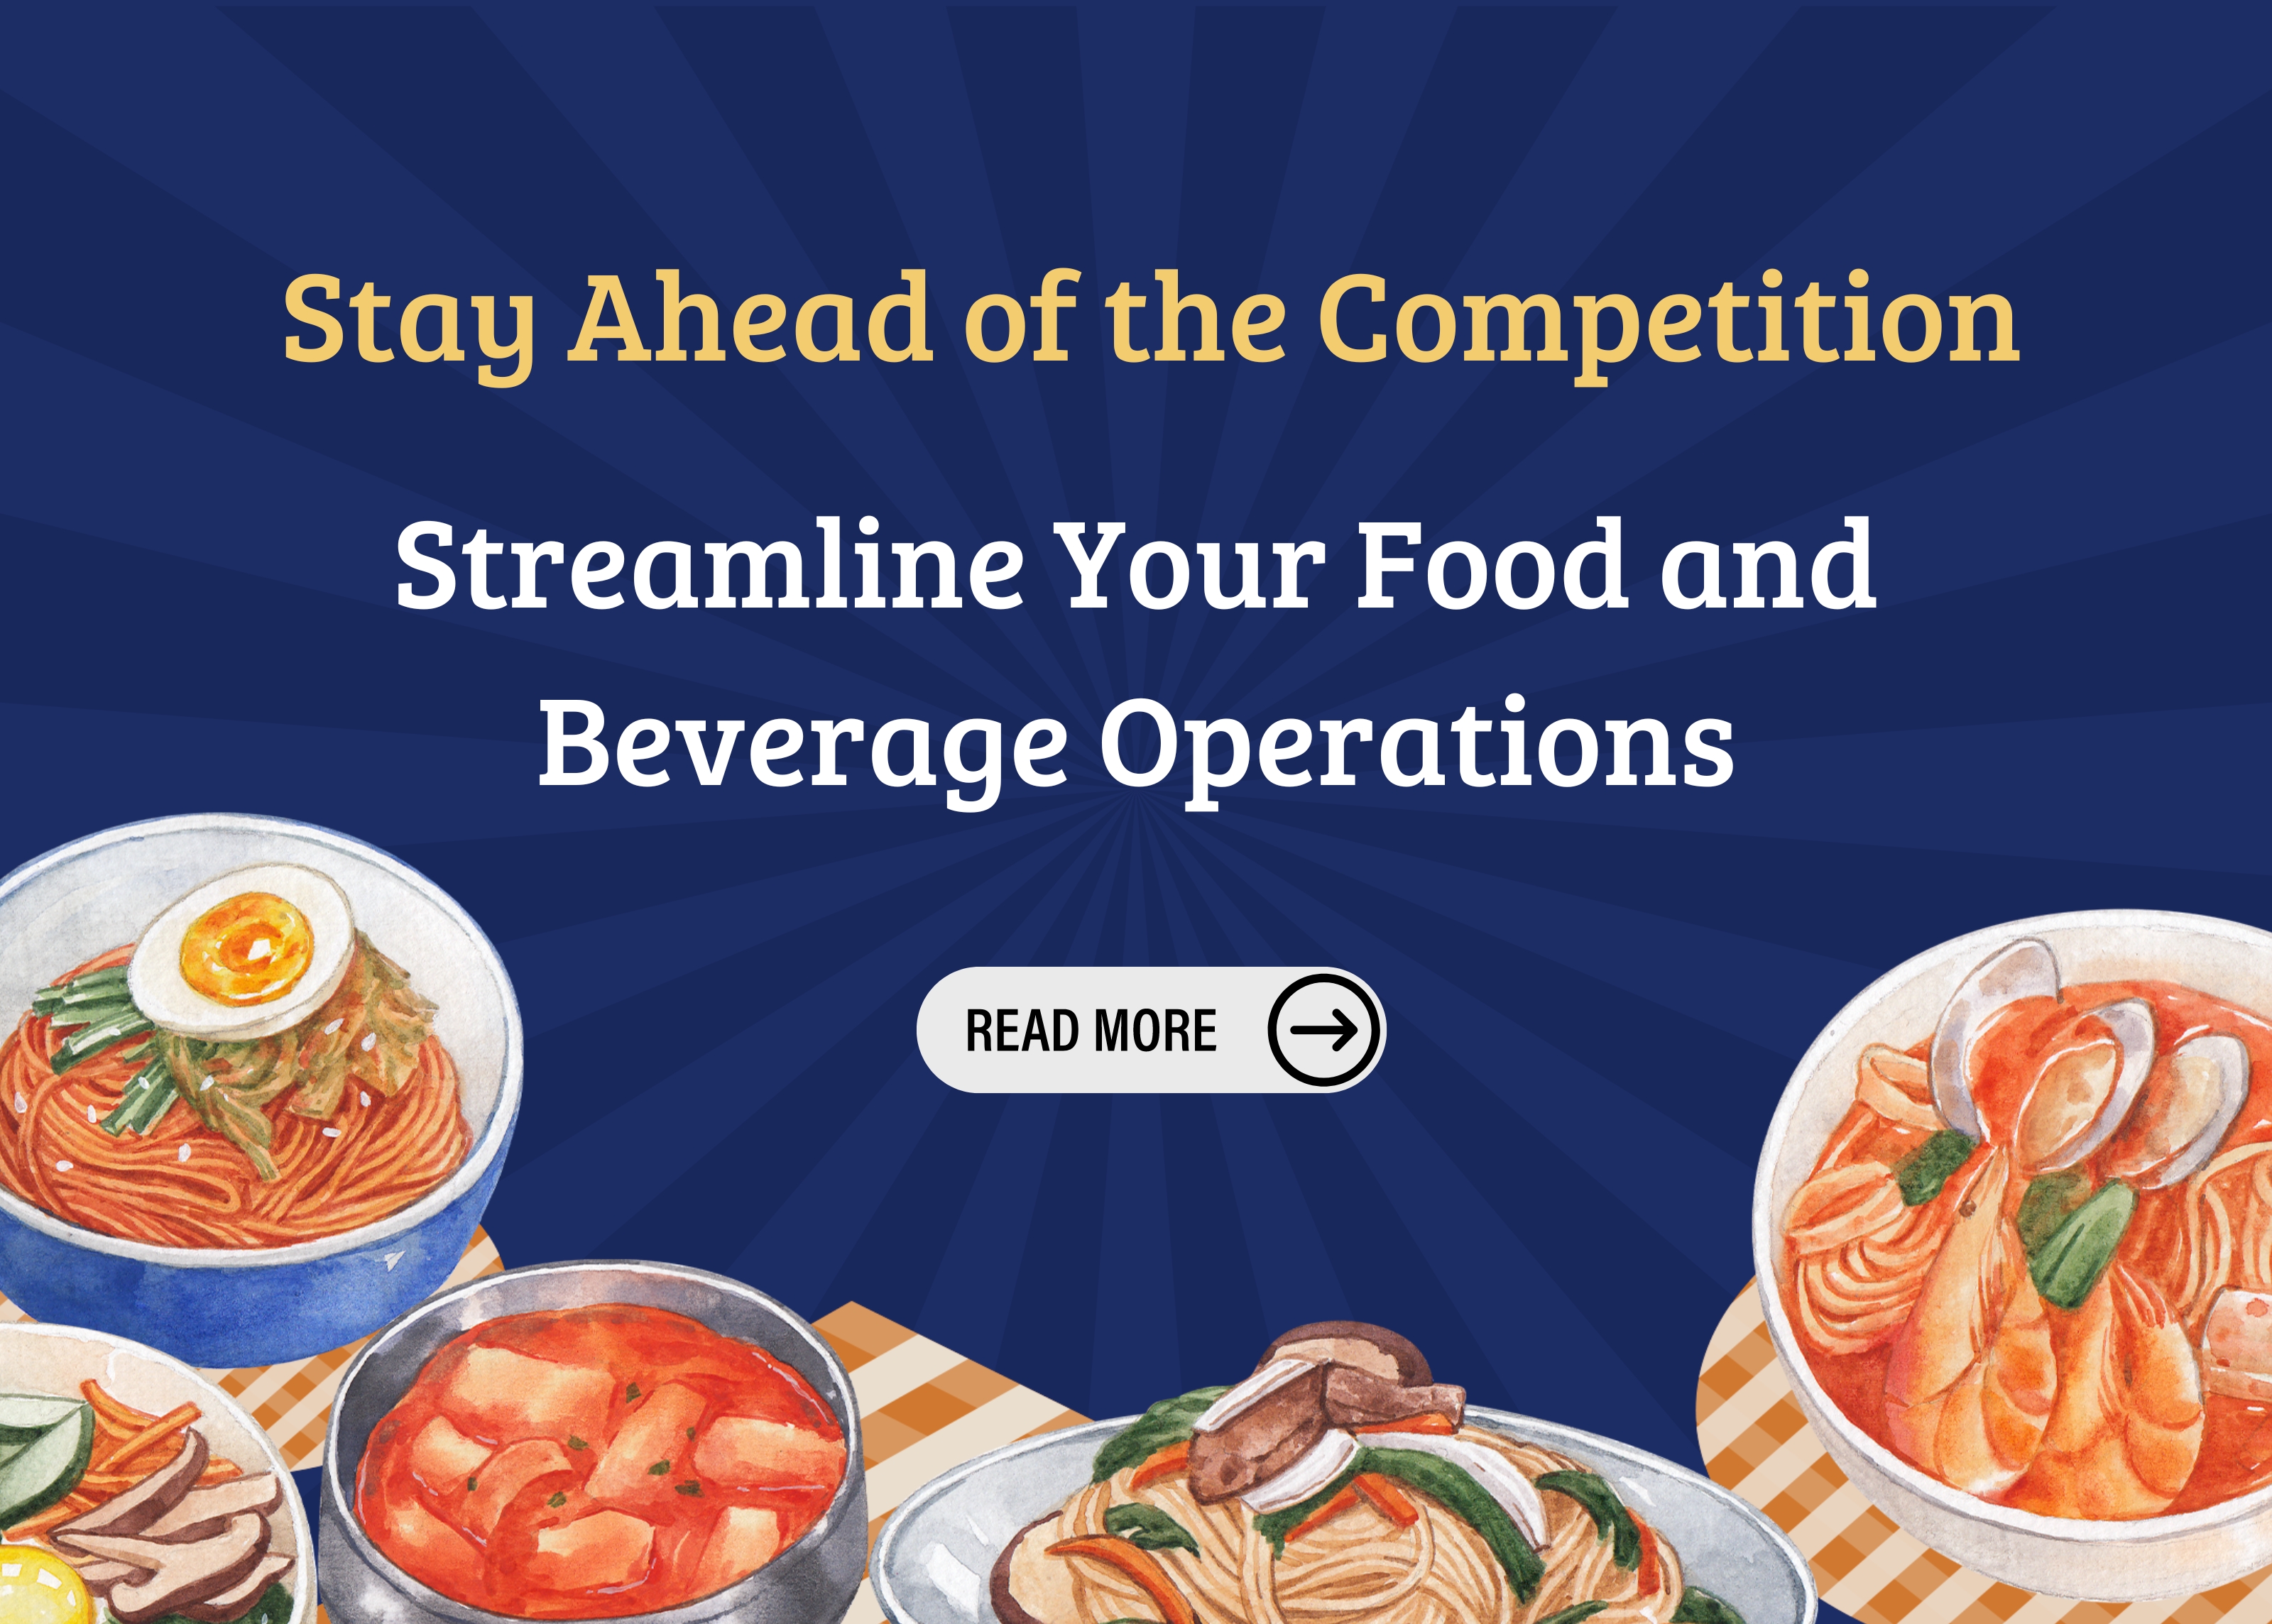 Streamline Your Food and Beverage Operations